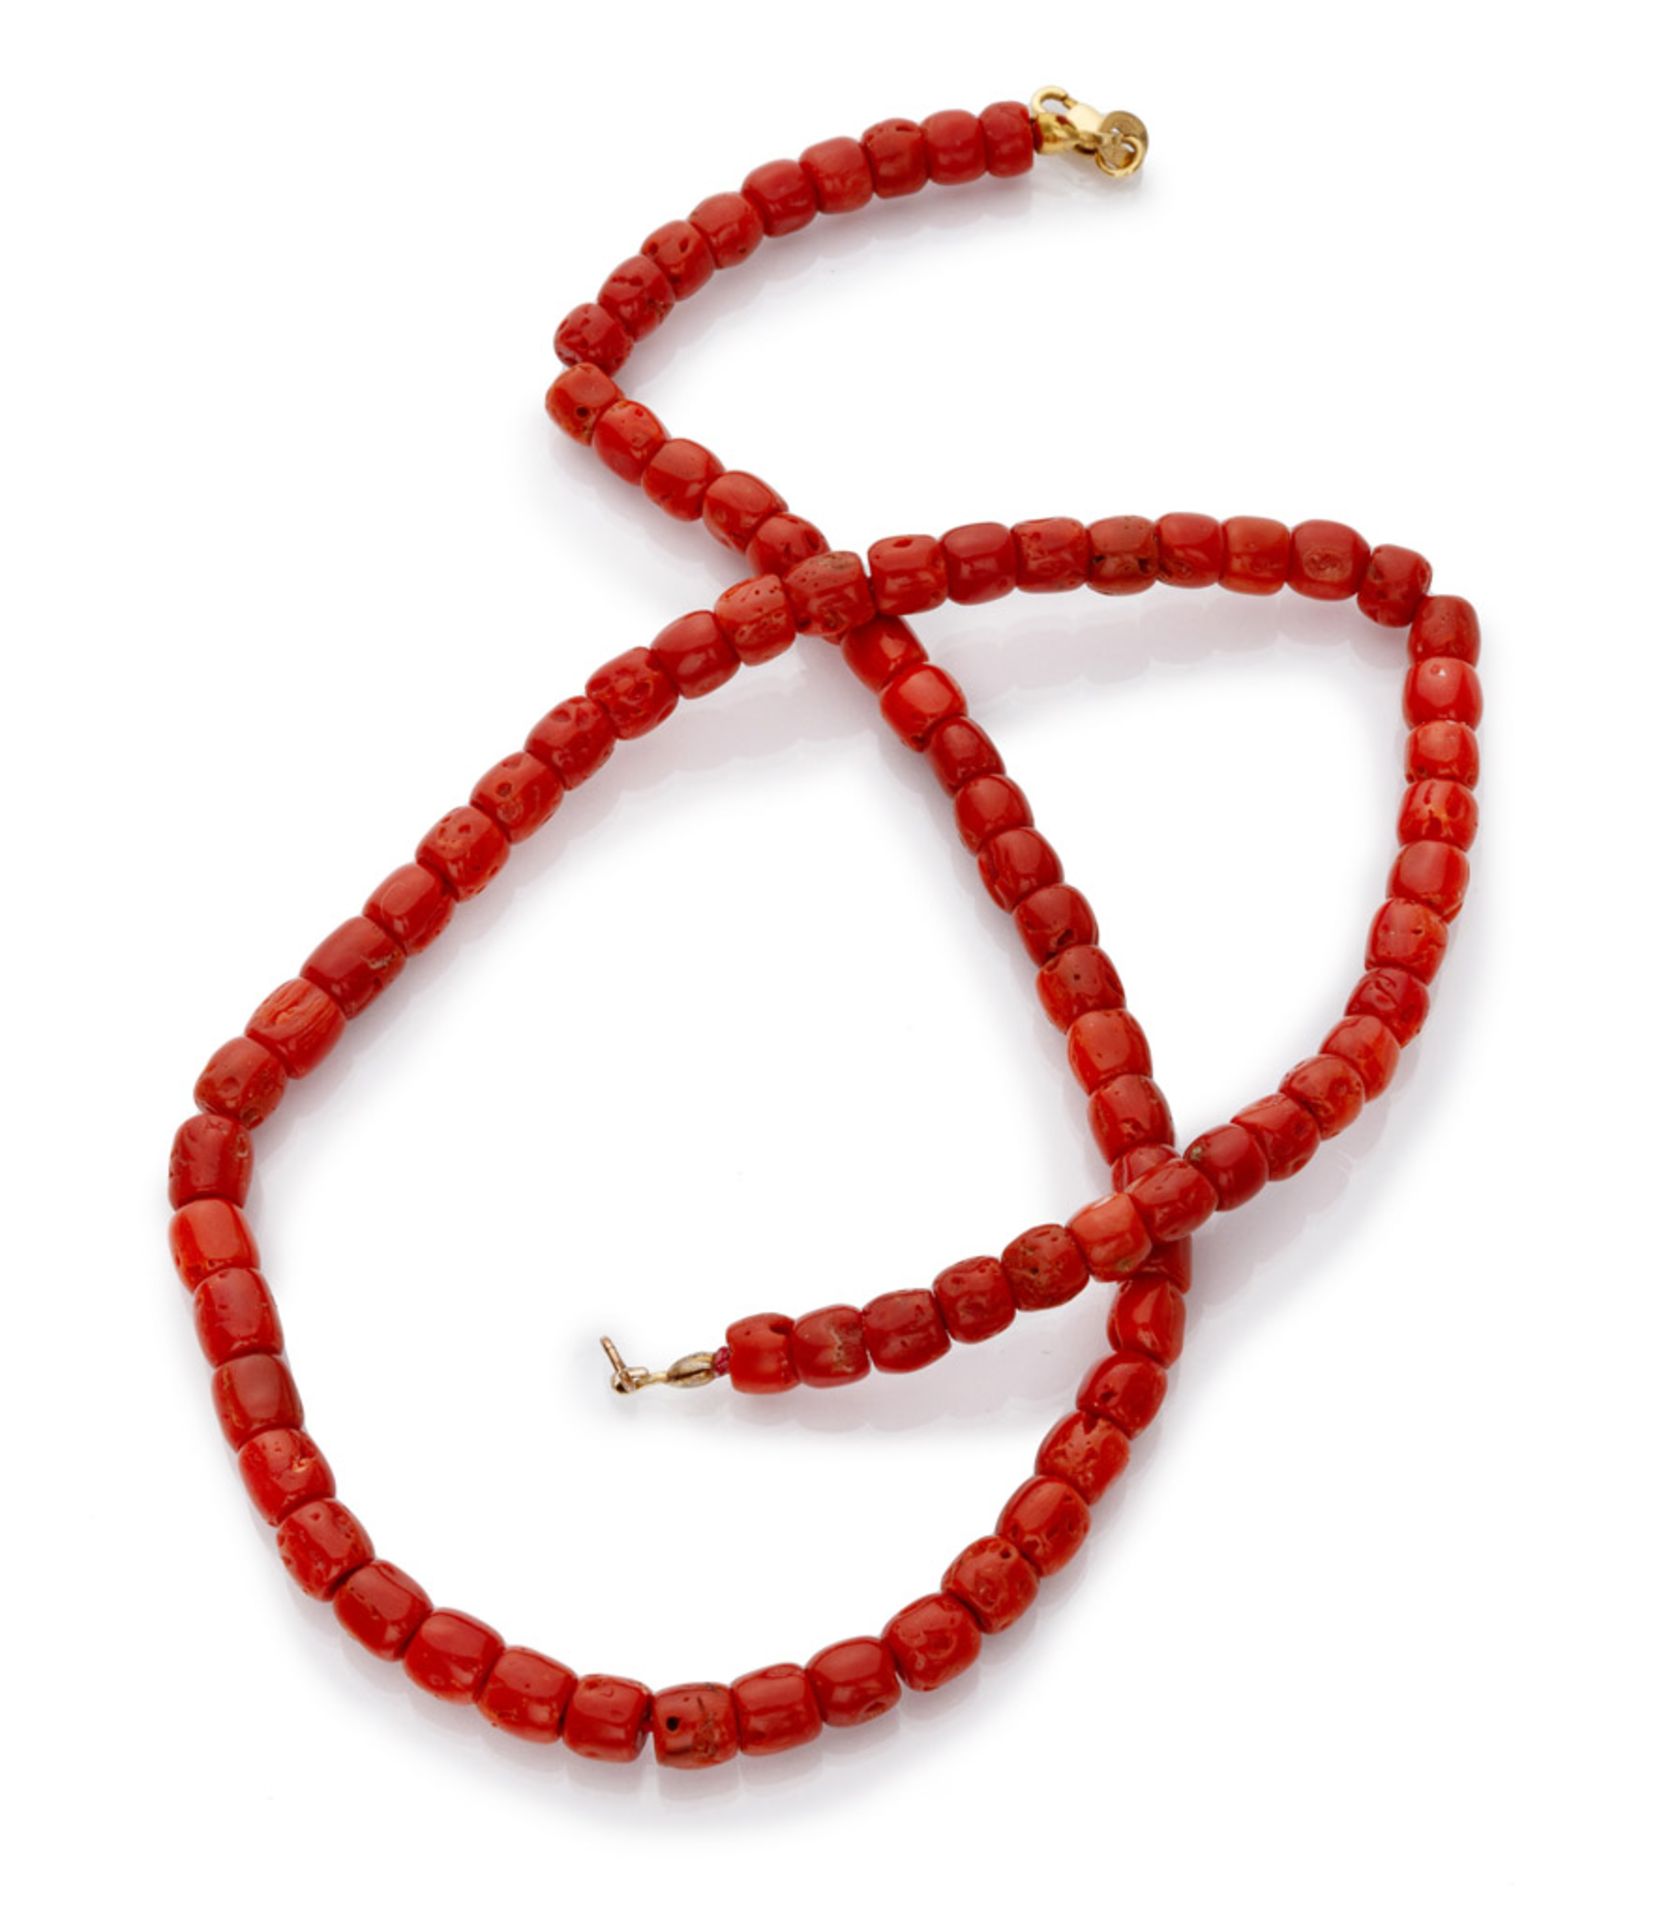 NECKLACE one thread with elements in red coral and clasp in gold 9 kts. Length cm. 48, total